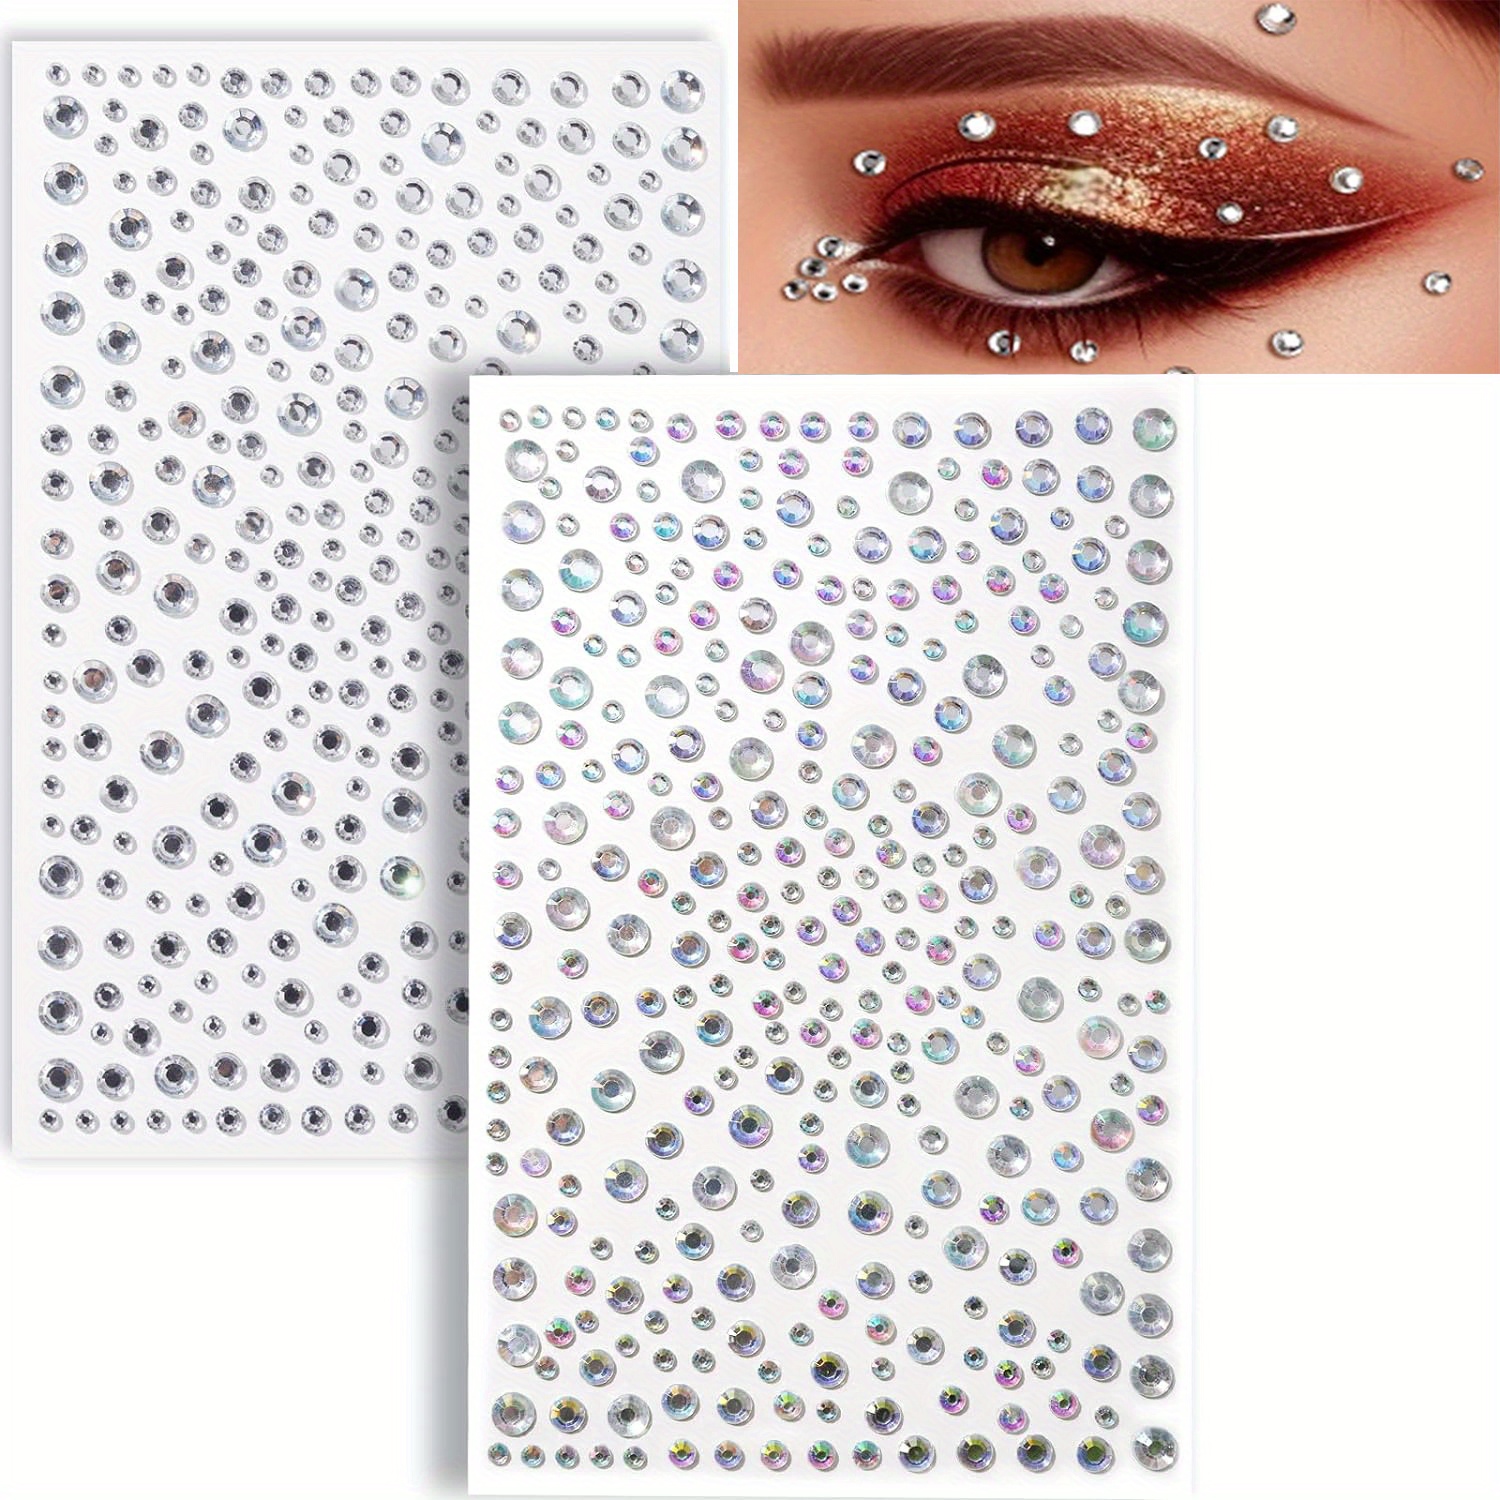 KraftGenius Allstarco 3mm SS12 Pink Self Adhesive Acrylic Rhinestones  Plastic Face Gems Stick On Body Jewels for DIY Cards and Invitations Crafts